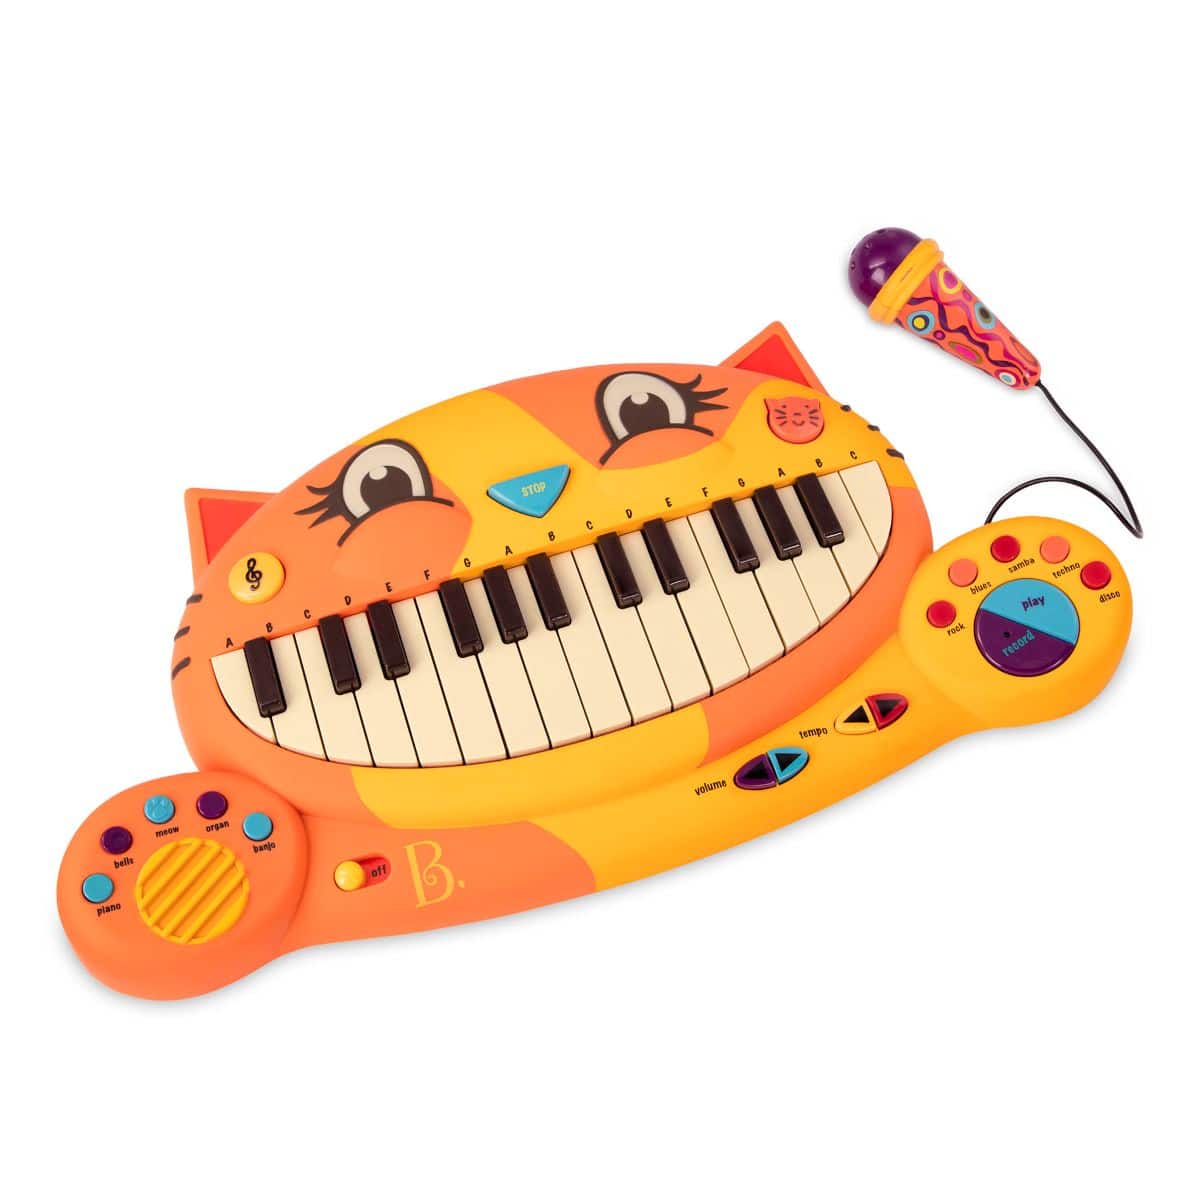 Toys 204-06-0411 Meowsic Musical Keyboard Microphone Piano Playing Toy for sale online B 